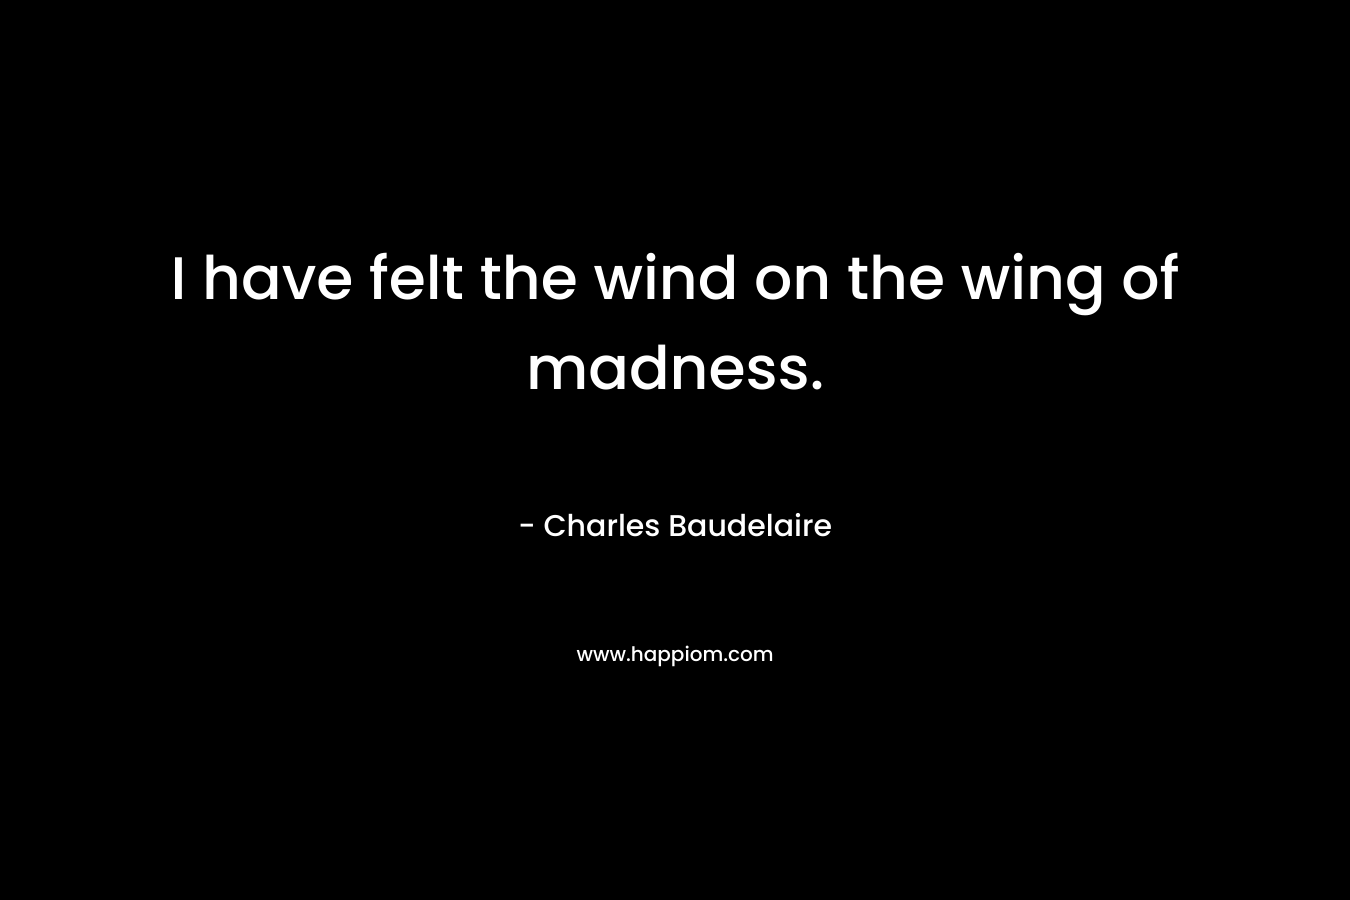 I have felt the wind on the wing of madness. – Charles Baudelaire